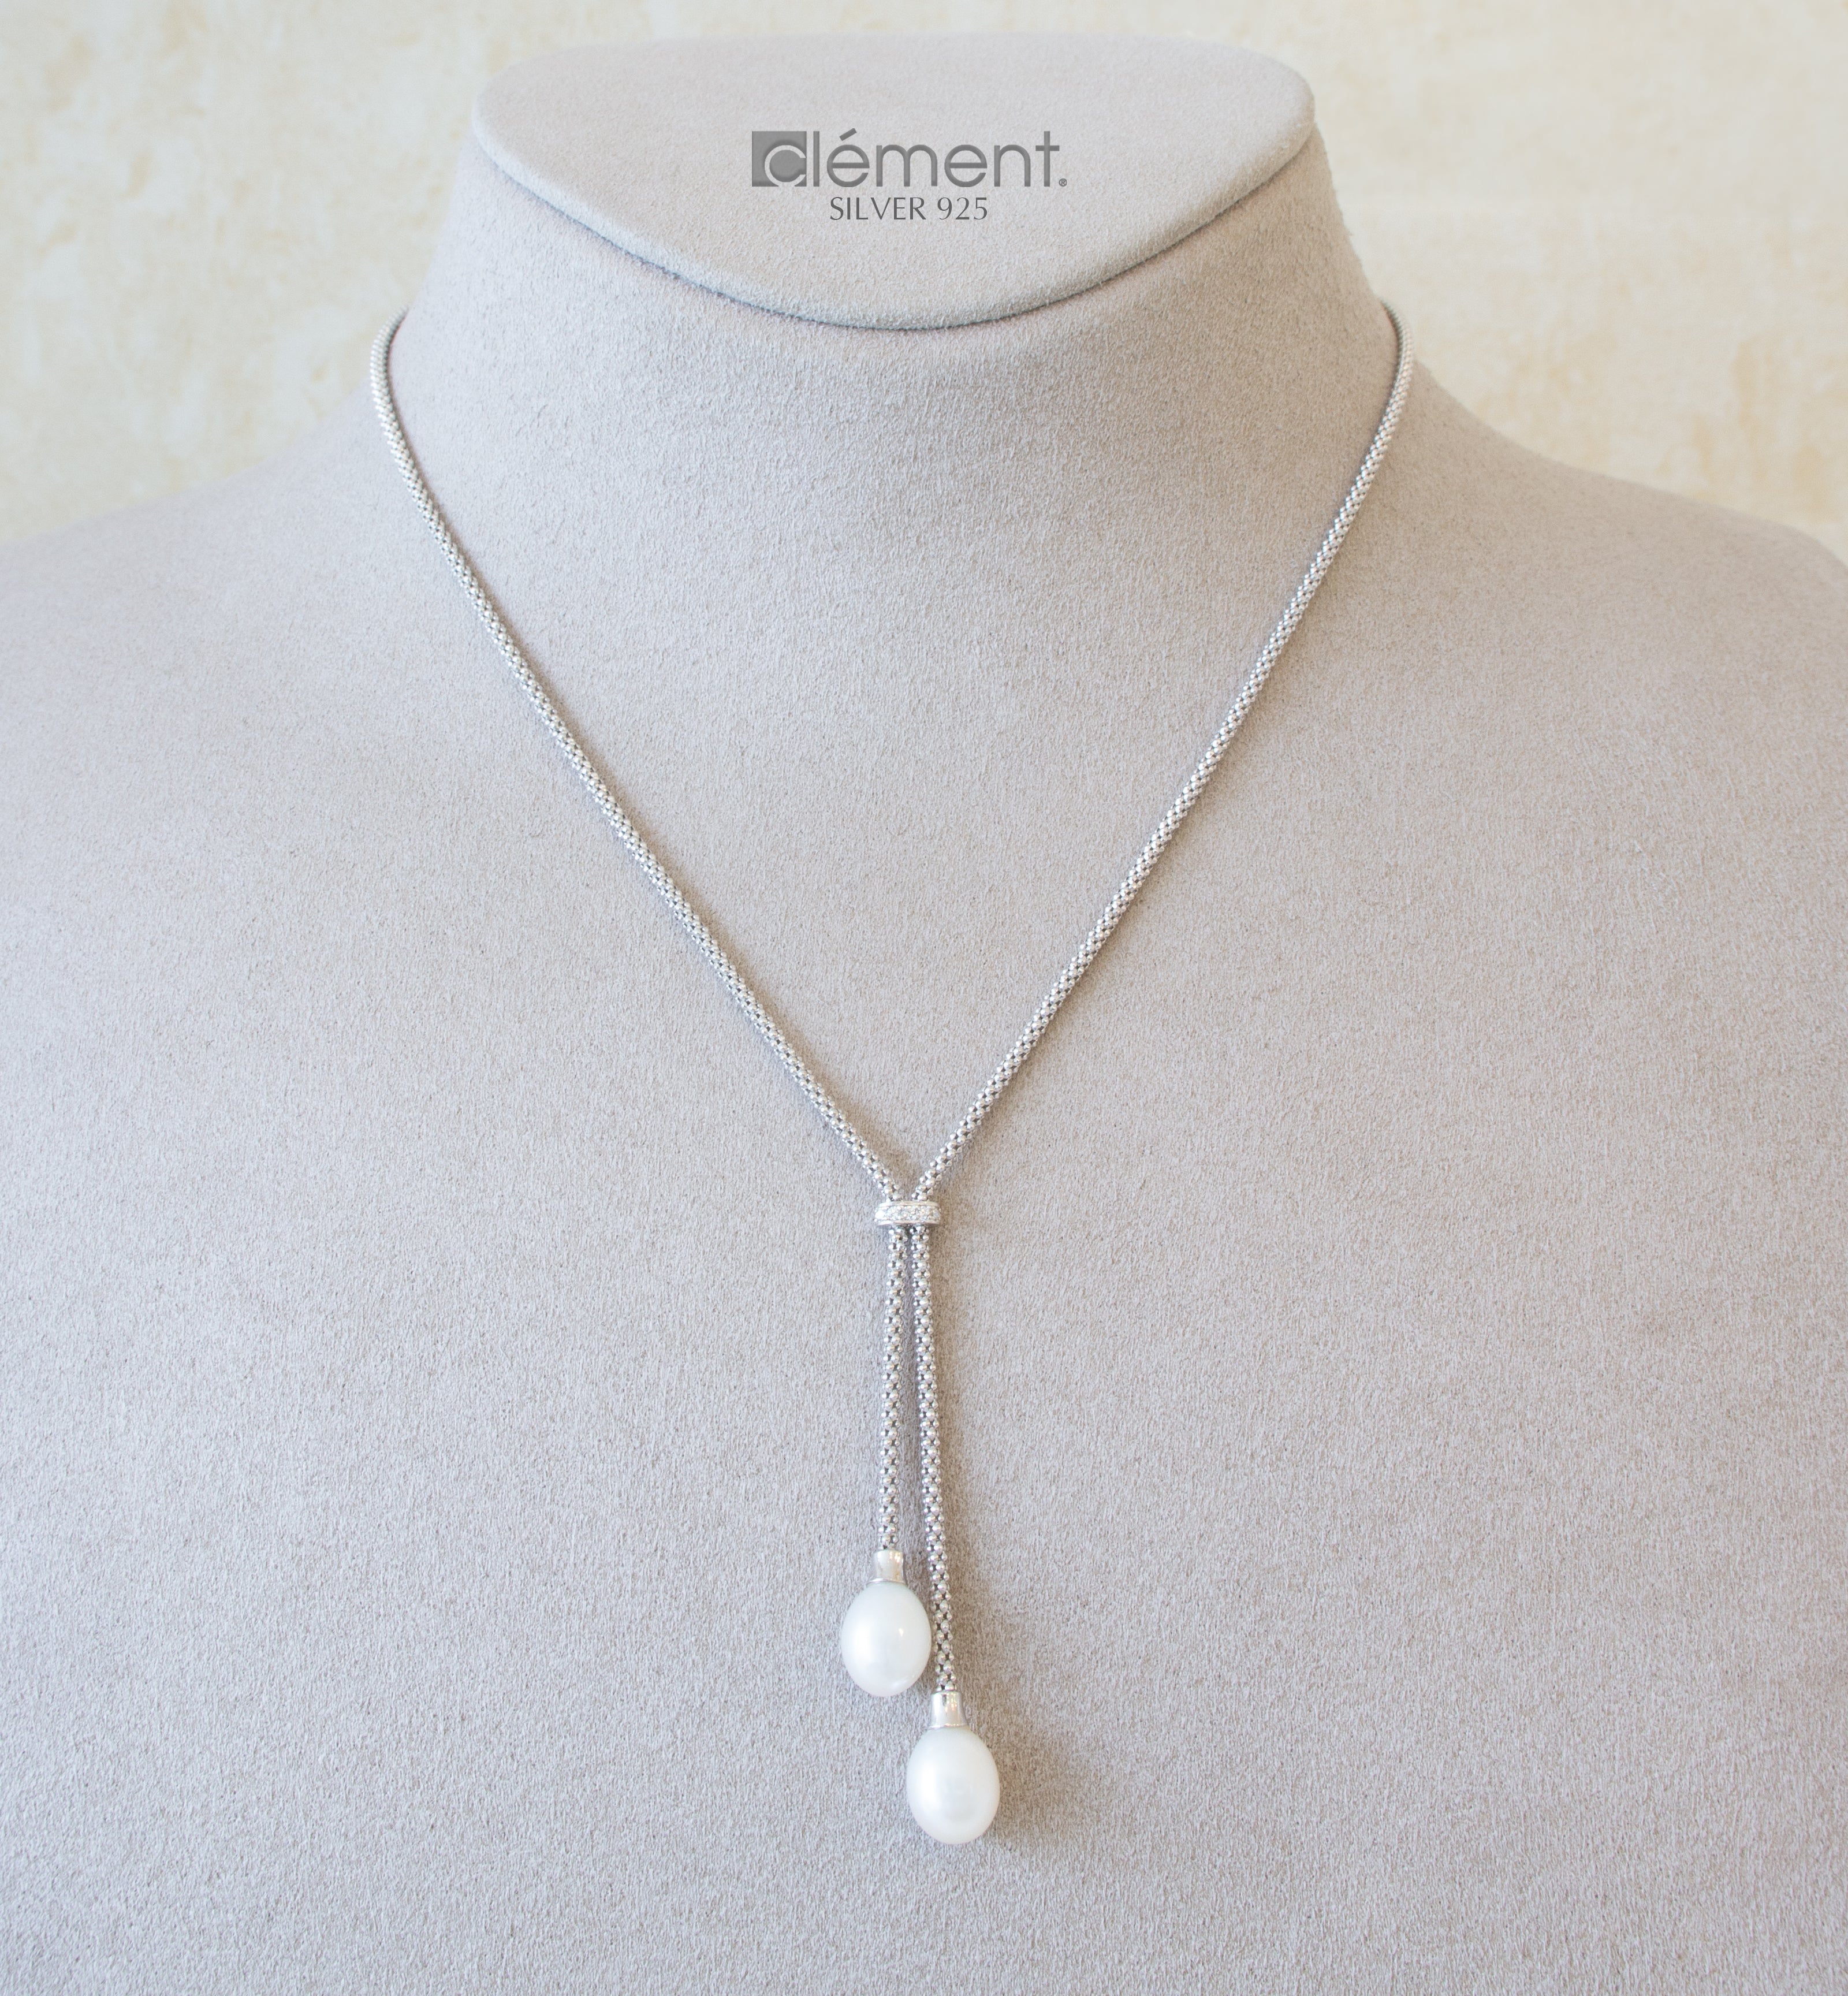 Silver 925 Necklace with Pearls